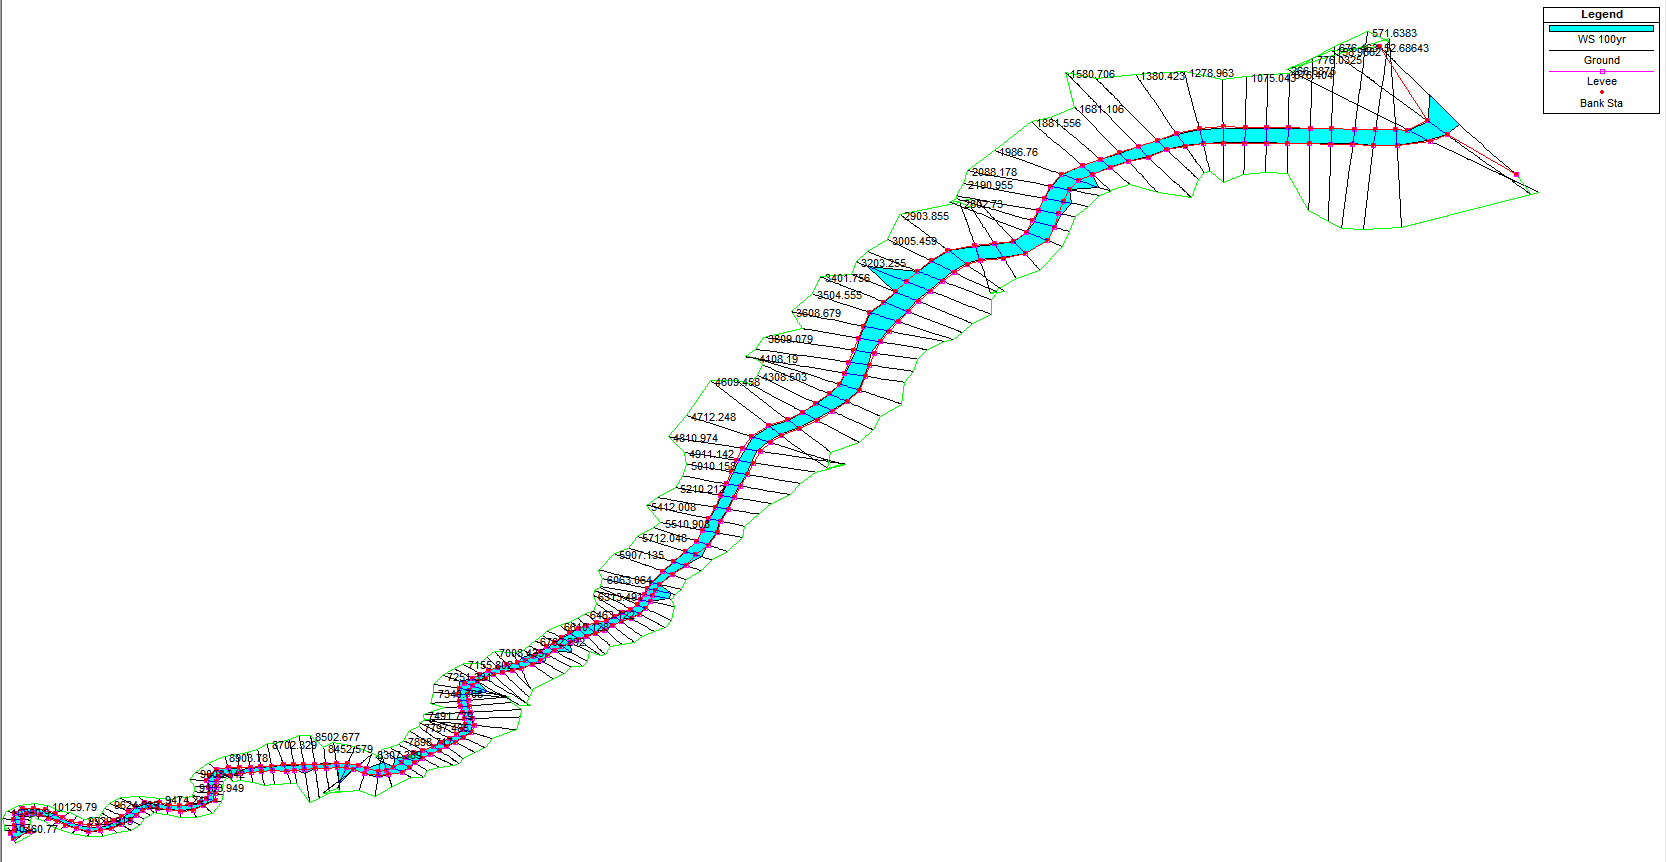 Fig. 4.5.17. HEC-RAS 100year frequency simulation results